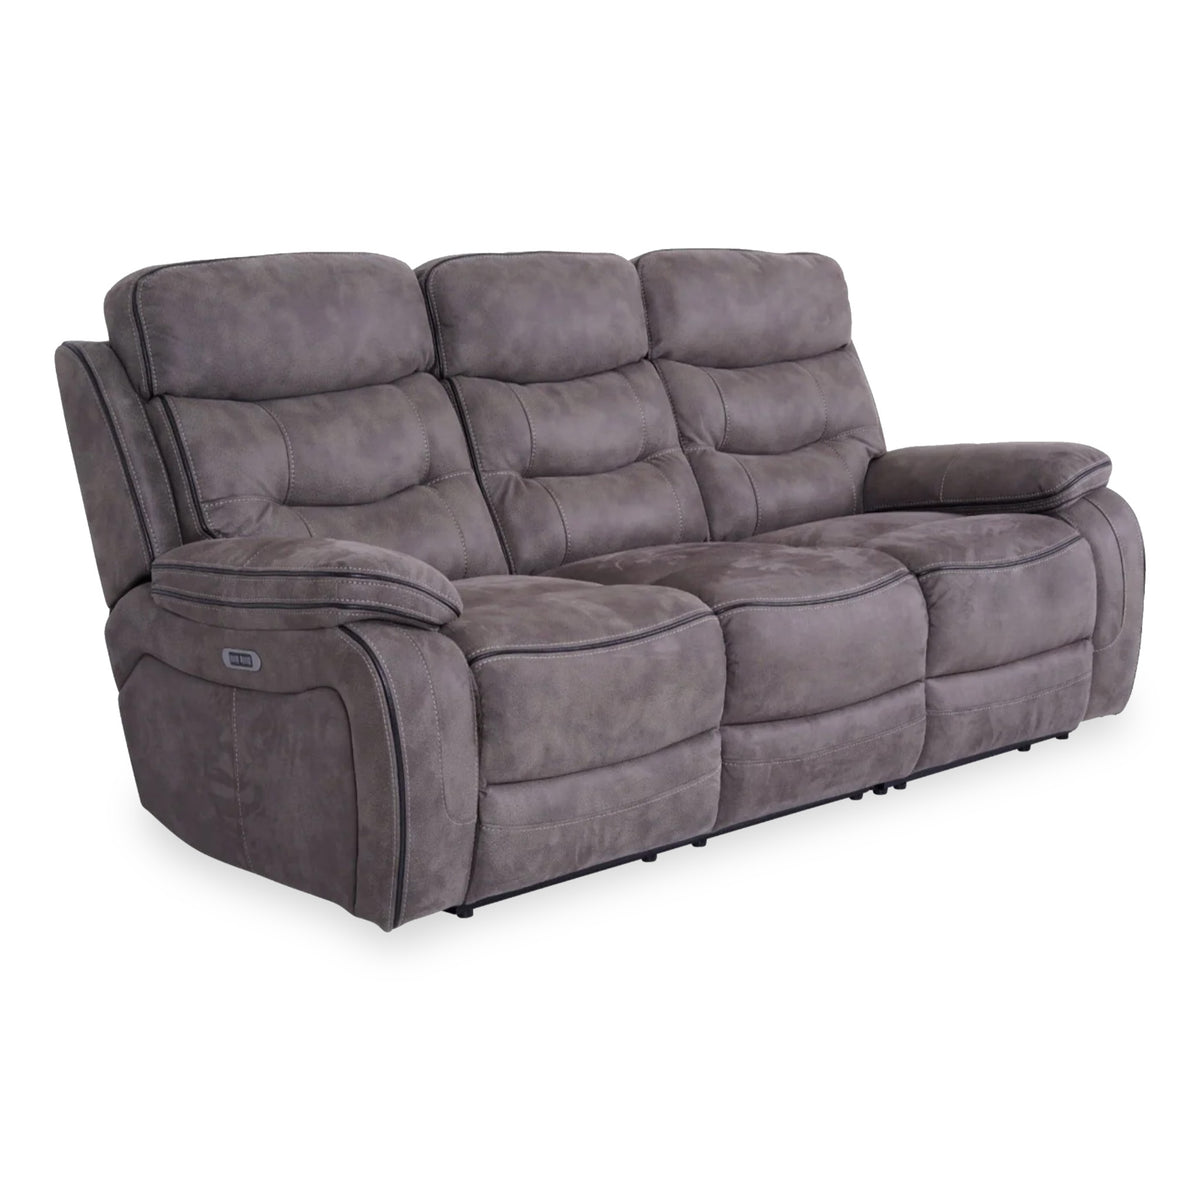 Stanford Charcoal Leather Electric Reclining 3 Seater Sofa from Roseland Furniture